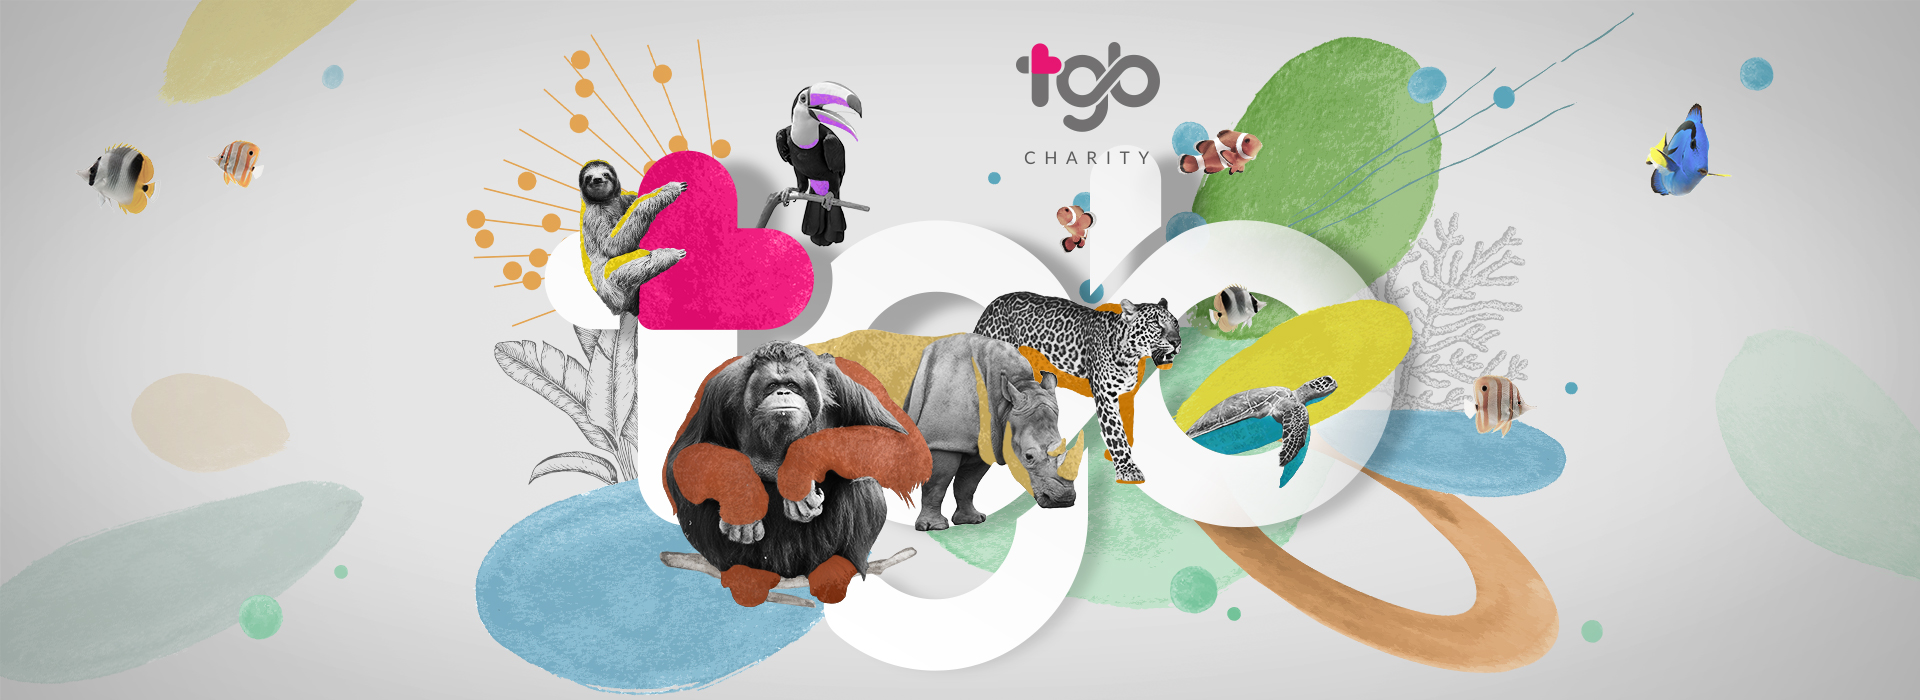 From sea to sky, love for all kinds - TGB Charity